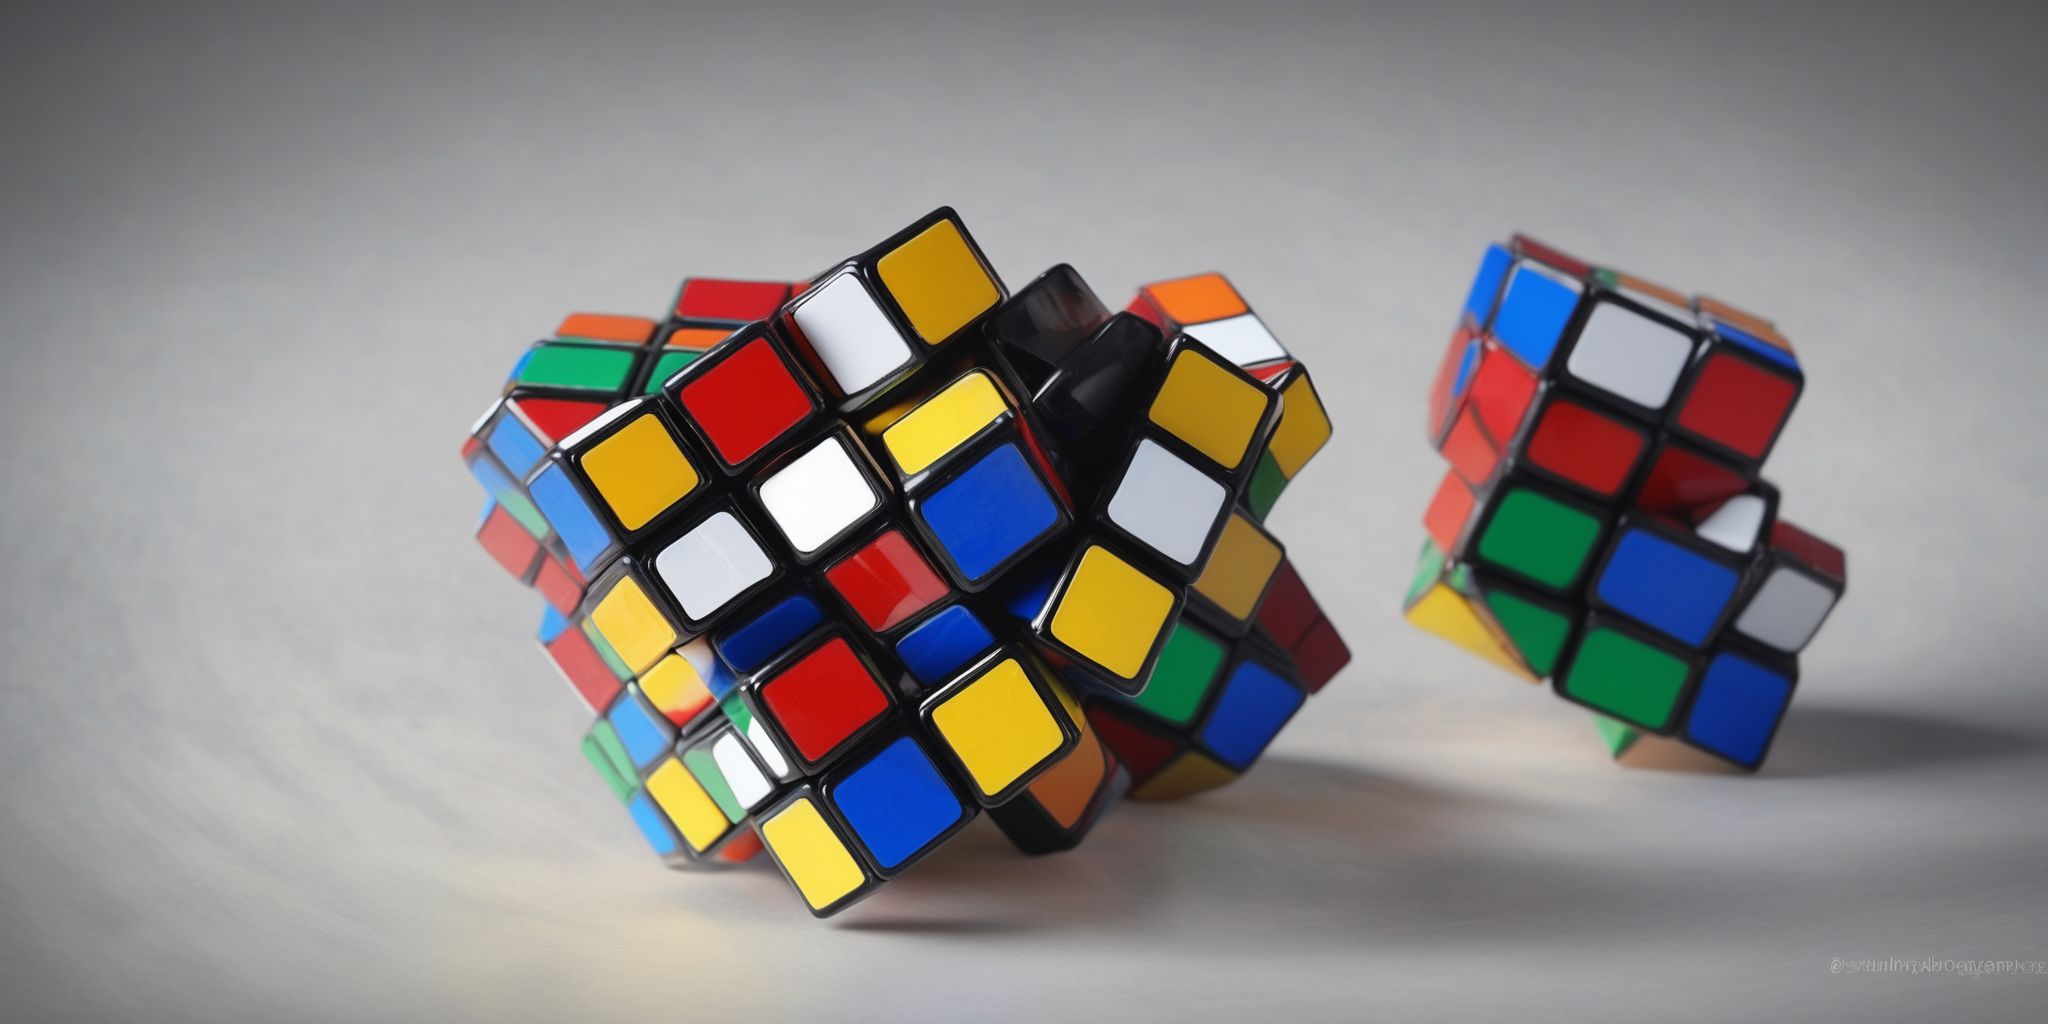 Rubik's Cube  in realistic, photographic style